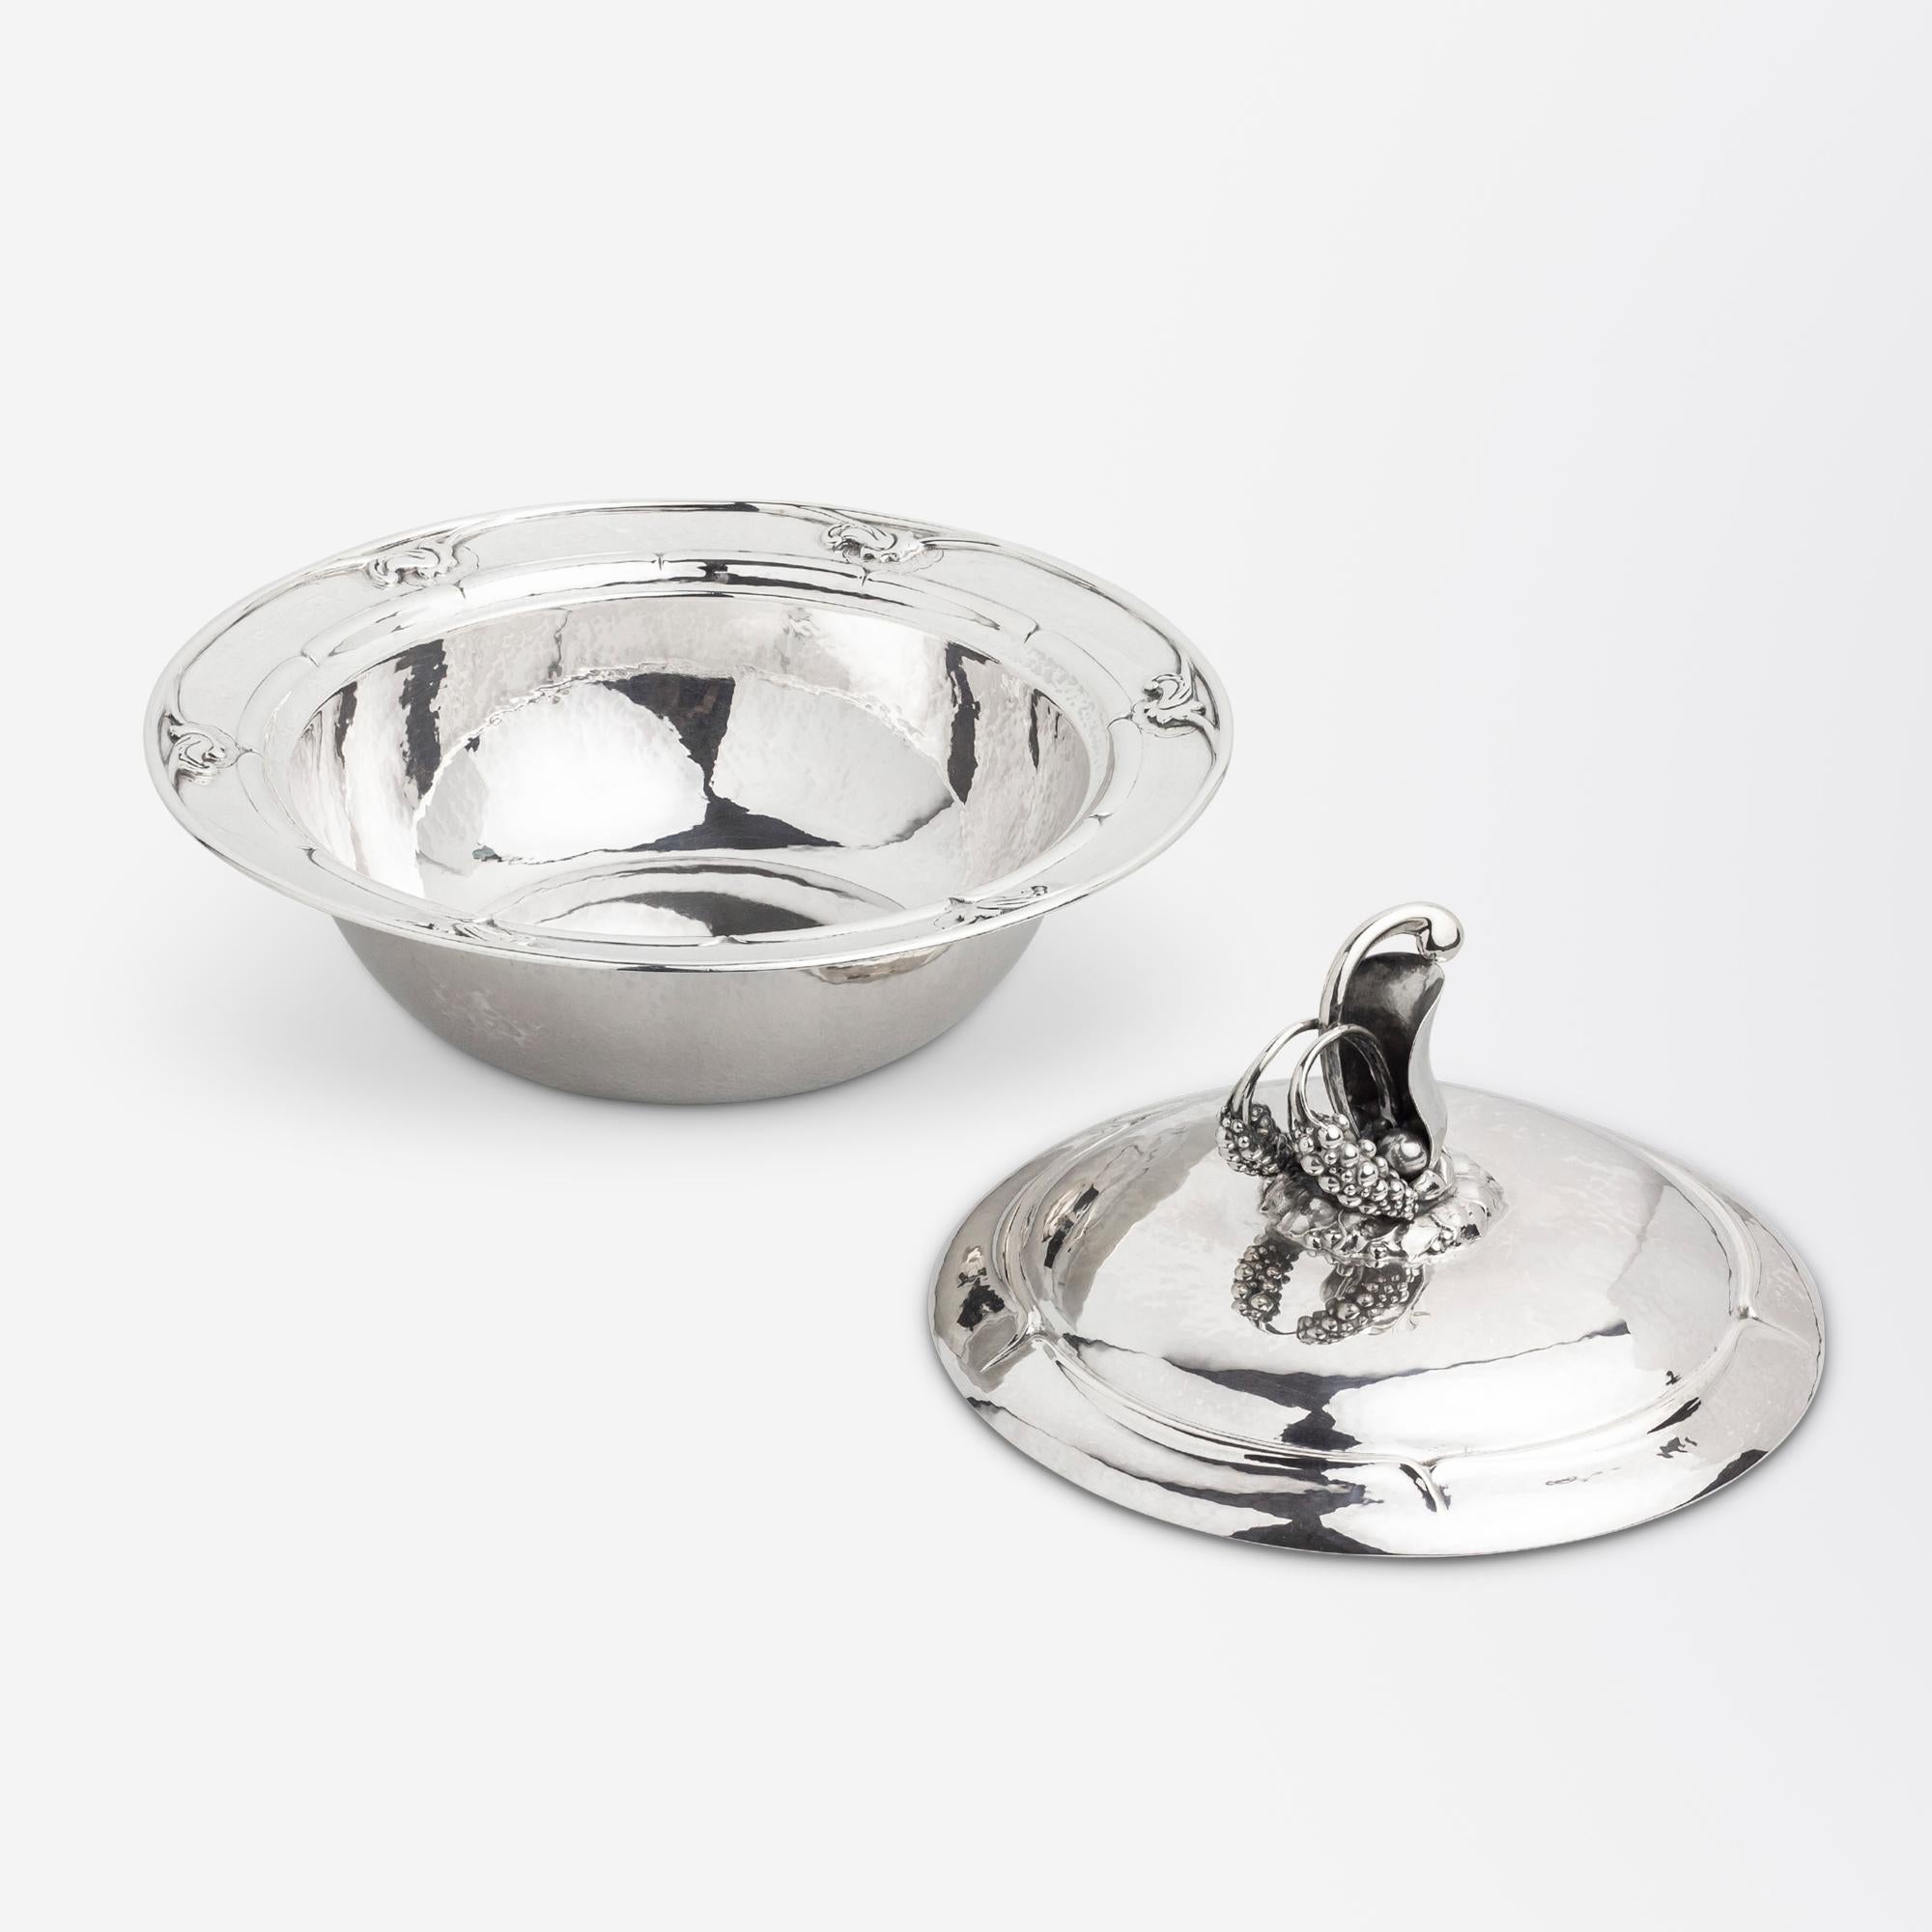 This rare piece of hand hammered sterling silver was manufactured by Danish silversmithing firm Georg Jensen during the Art Nouveau period. The piece is known as a 'lidded vegetable' dish and is completely hand hammered with an elaborate berry style